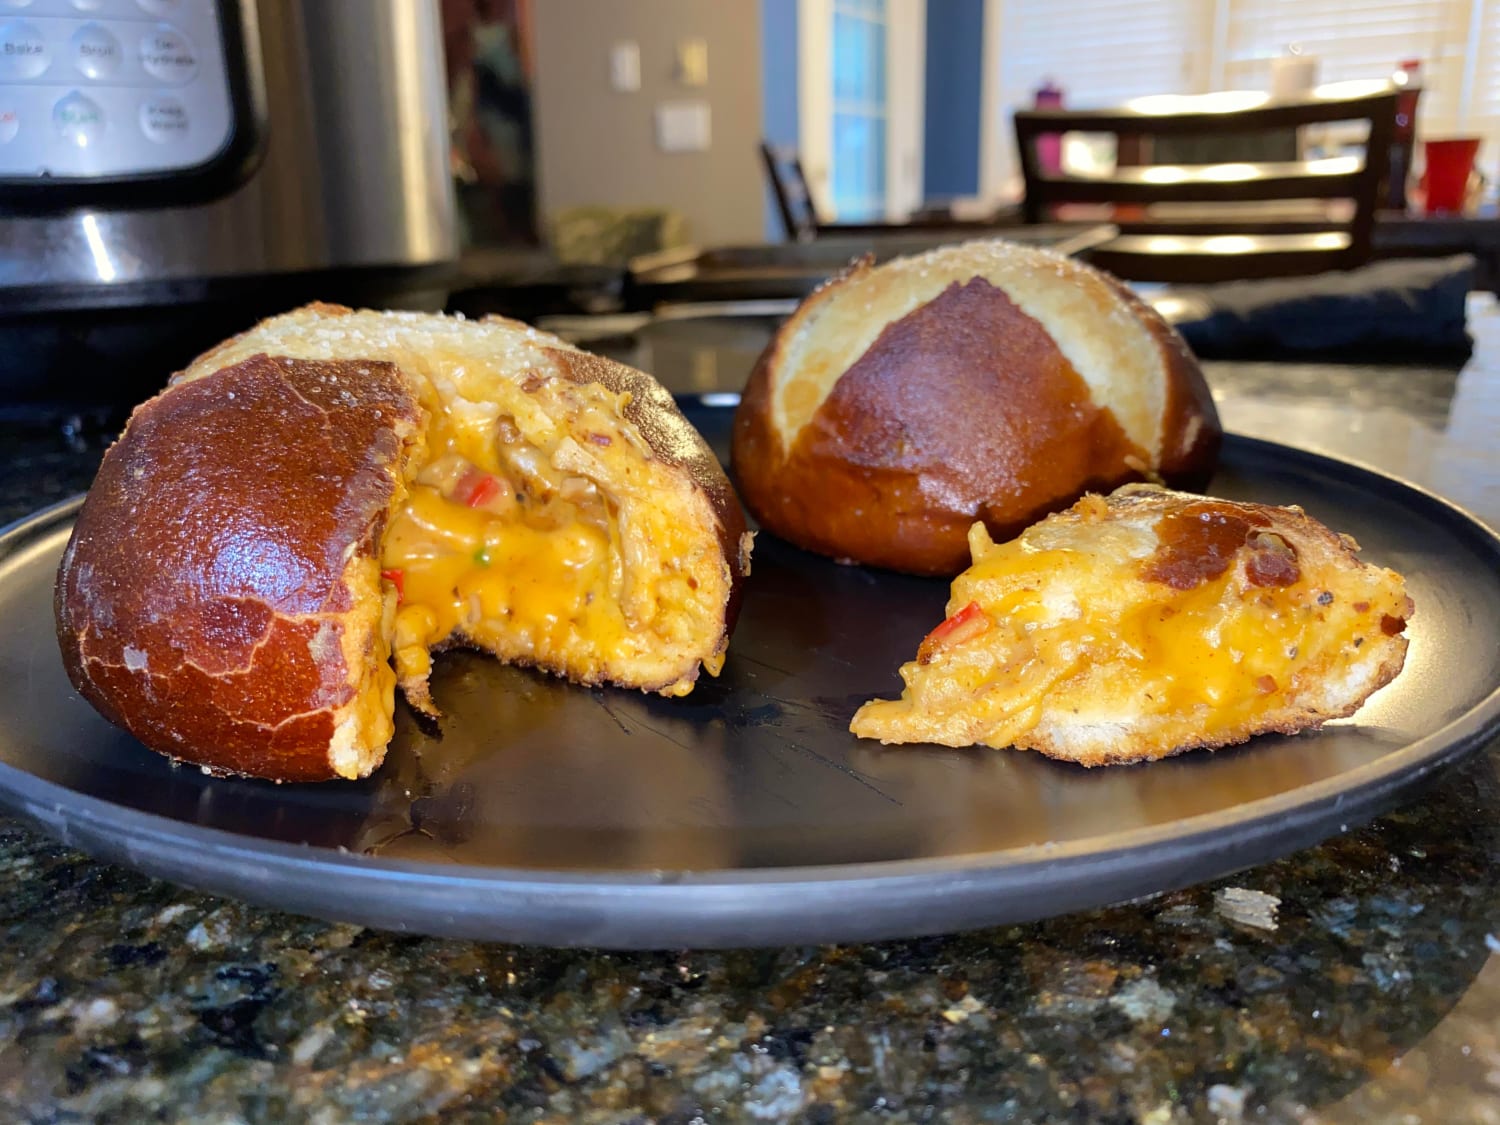 [homemade] Pretzel bun stuffed with spicy cheese, peppers, and seasoned chicken